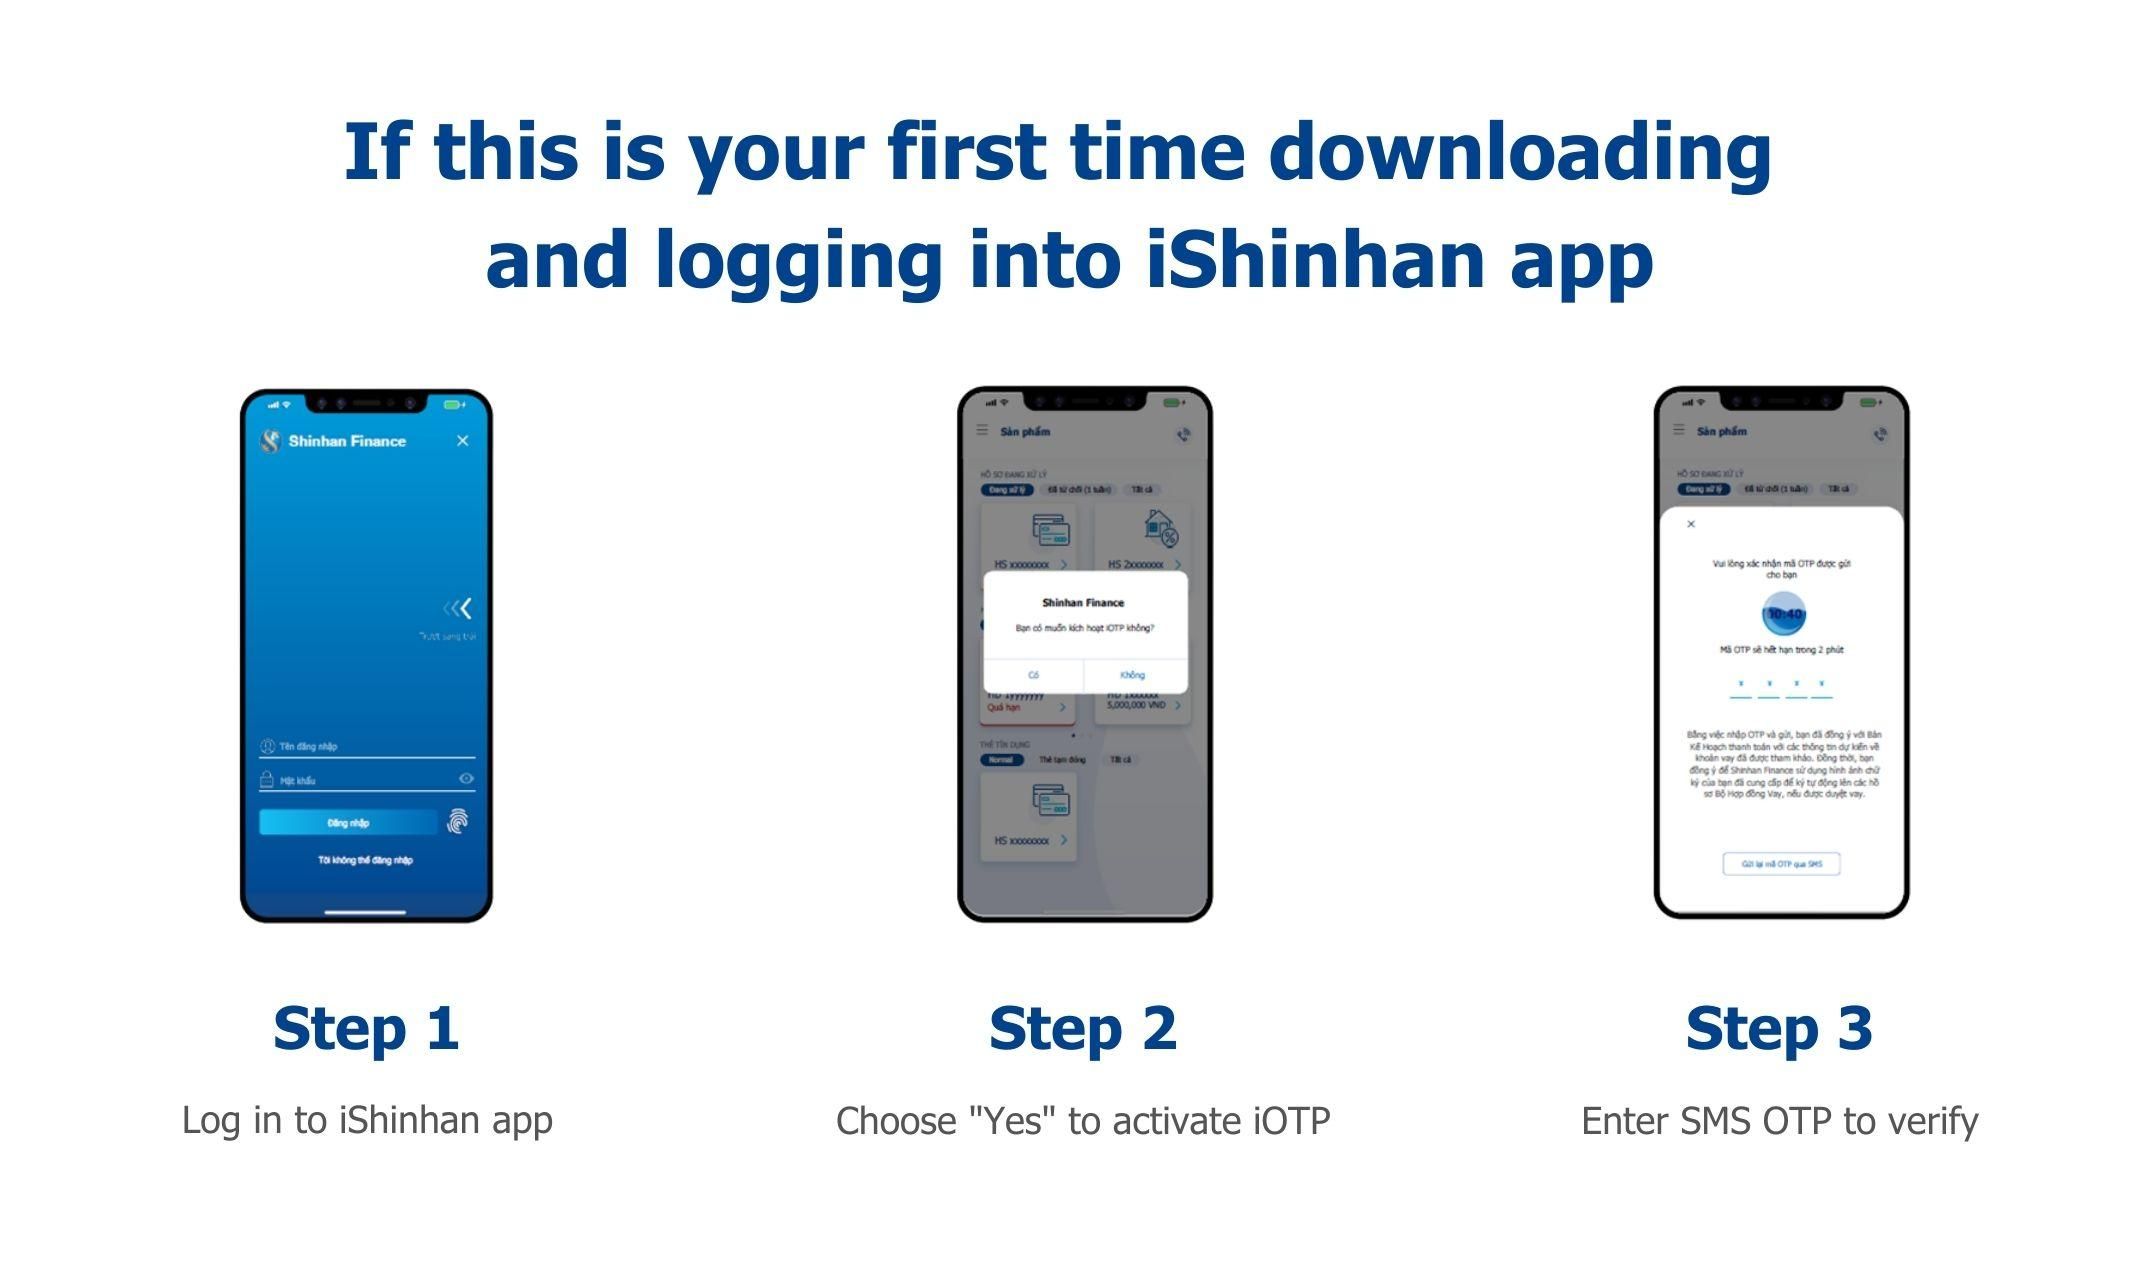 If this is your first time downloading and logging into iShinhan app